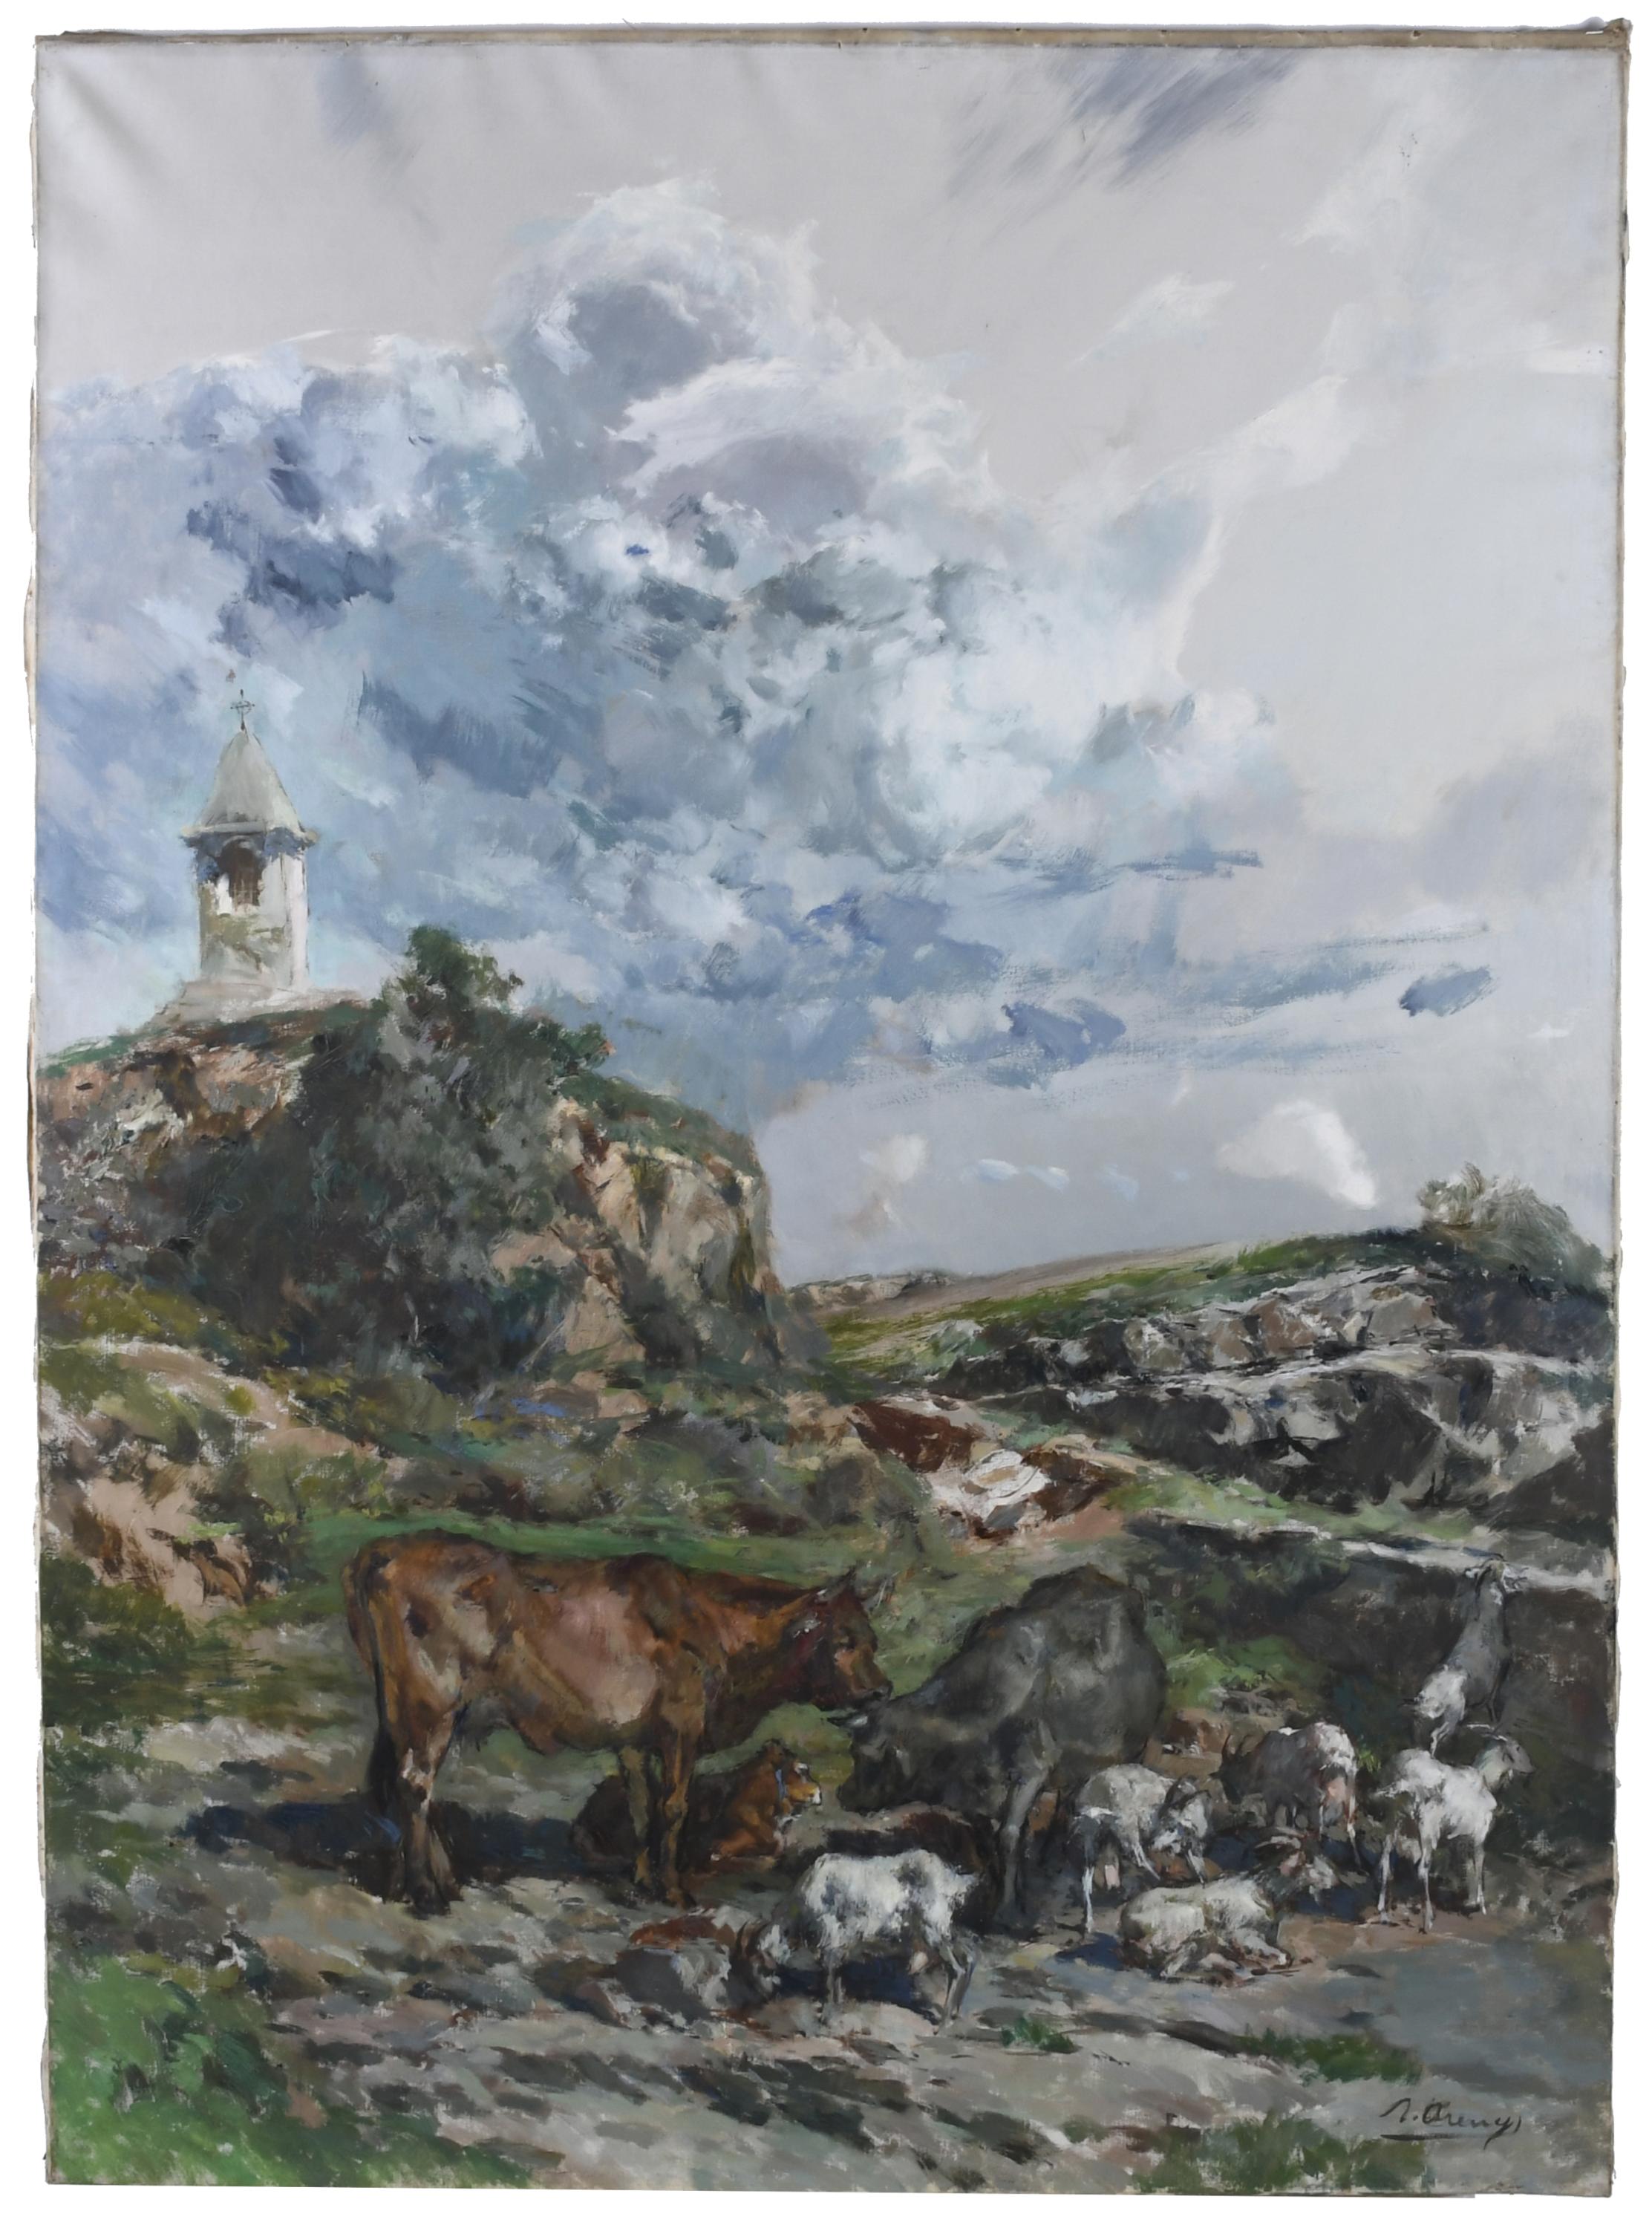 RICARD ARENYS GALDON (1914-1977). "LANDSCAPE WITH LIVESTOCK